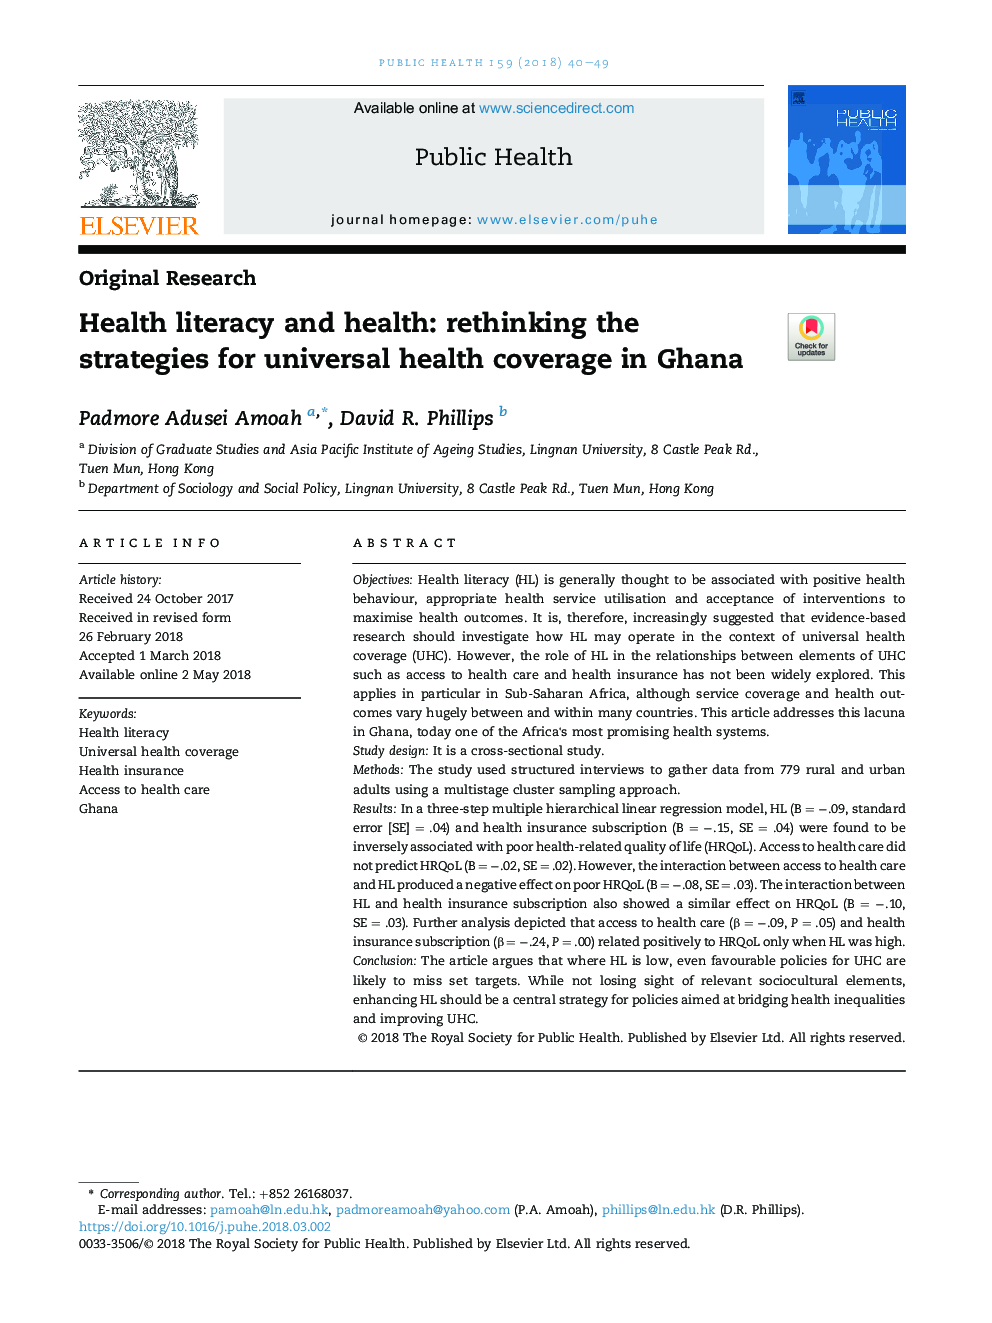 Health literacy and health: rethinking the strategies for universal health coverage in Ghana